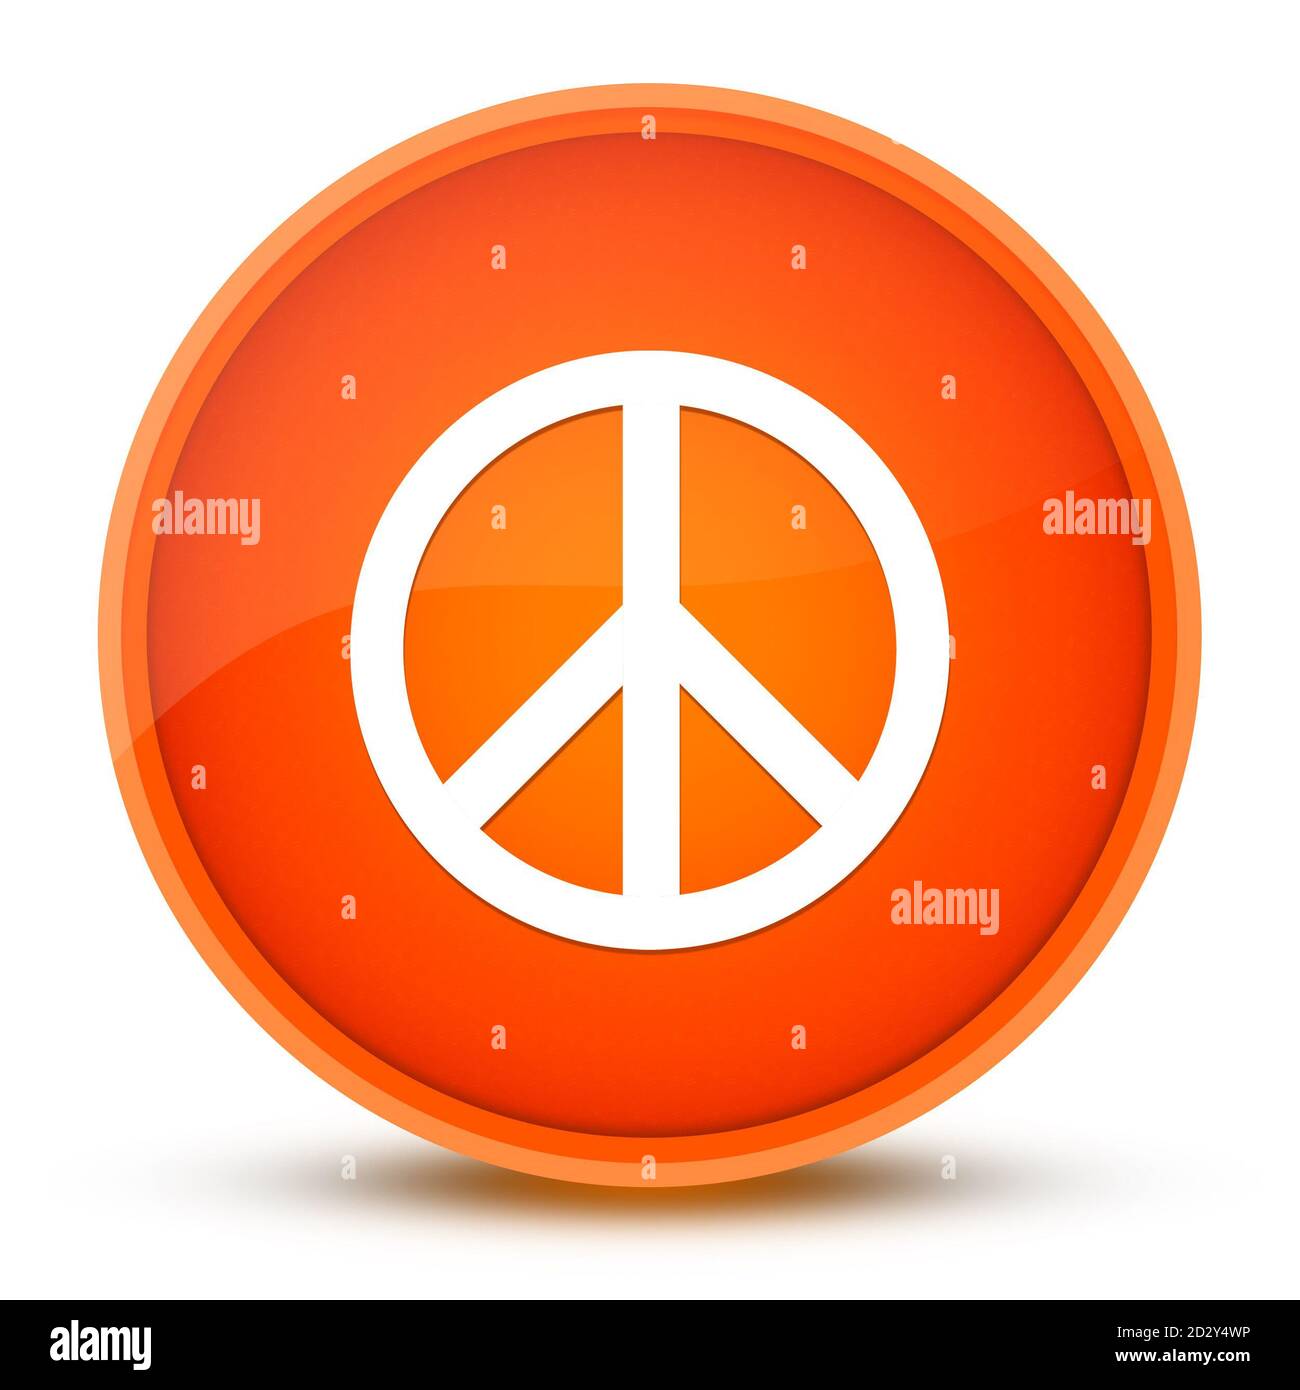 Peace sign luxurious glossy orange round button abstract illustration ...